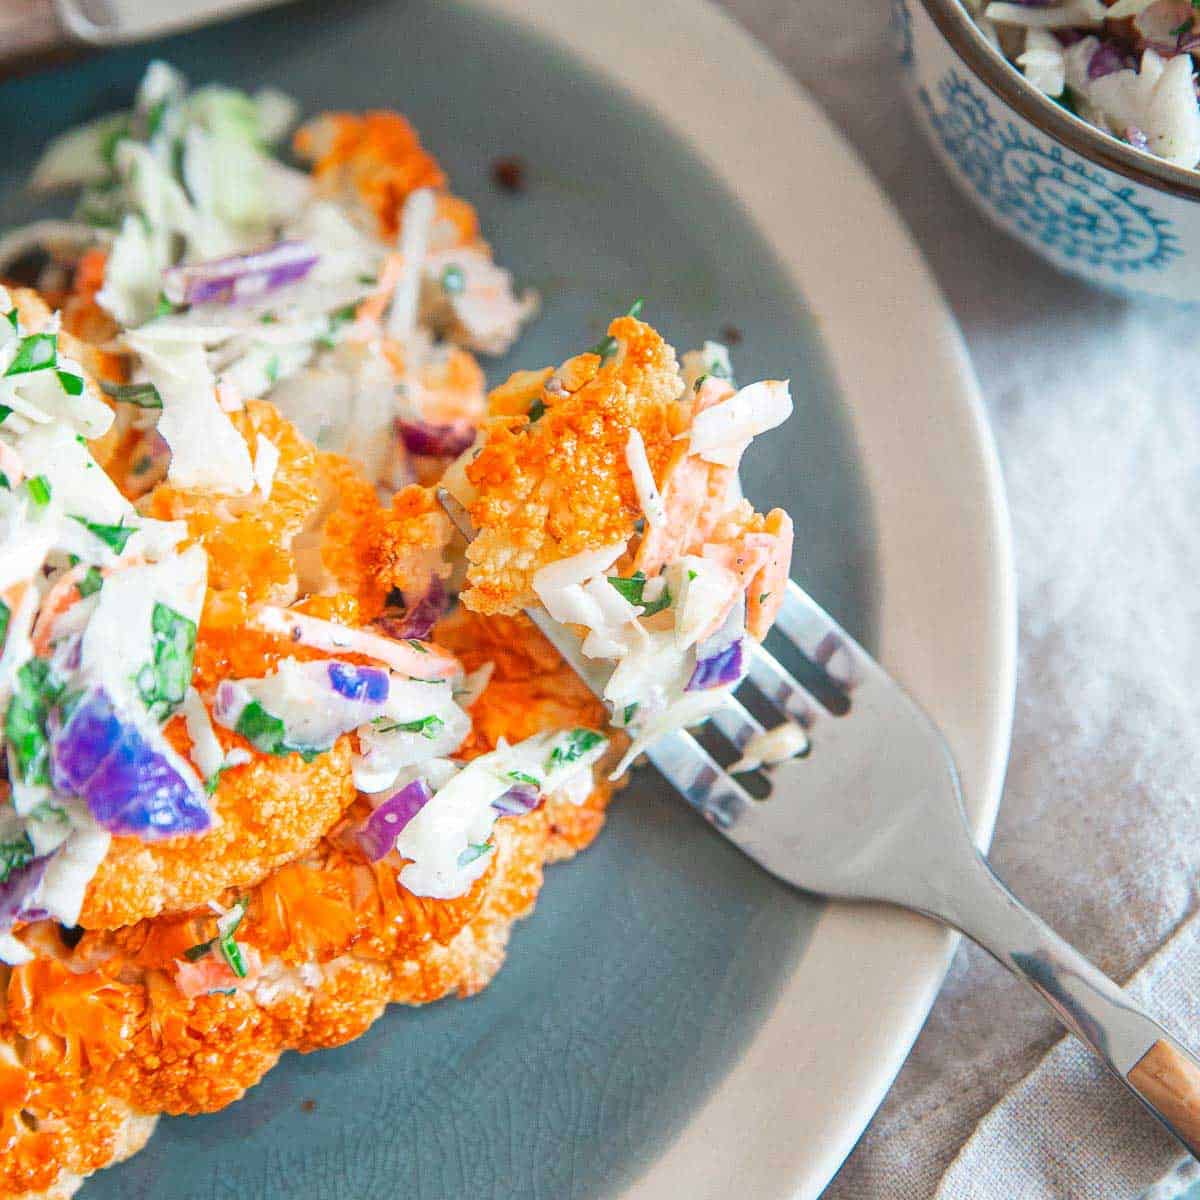 Get all the buffalo sauce flavor without the guilt in these buffalo cauliflower steaks with blue cheese coleslaw.